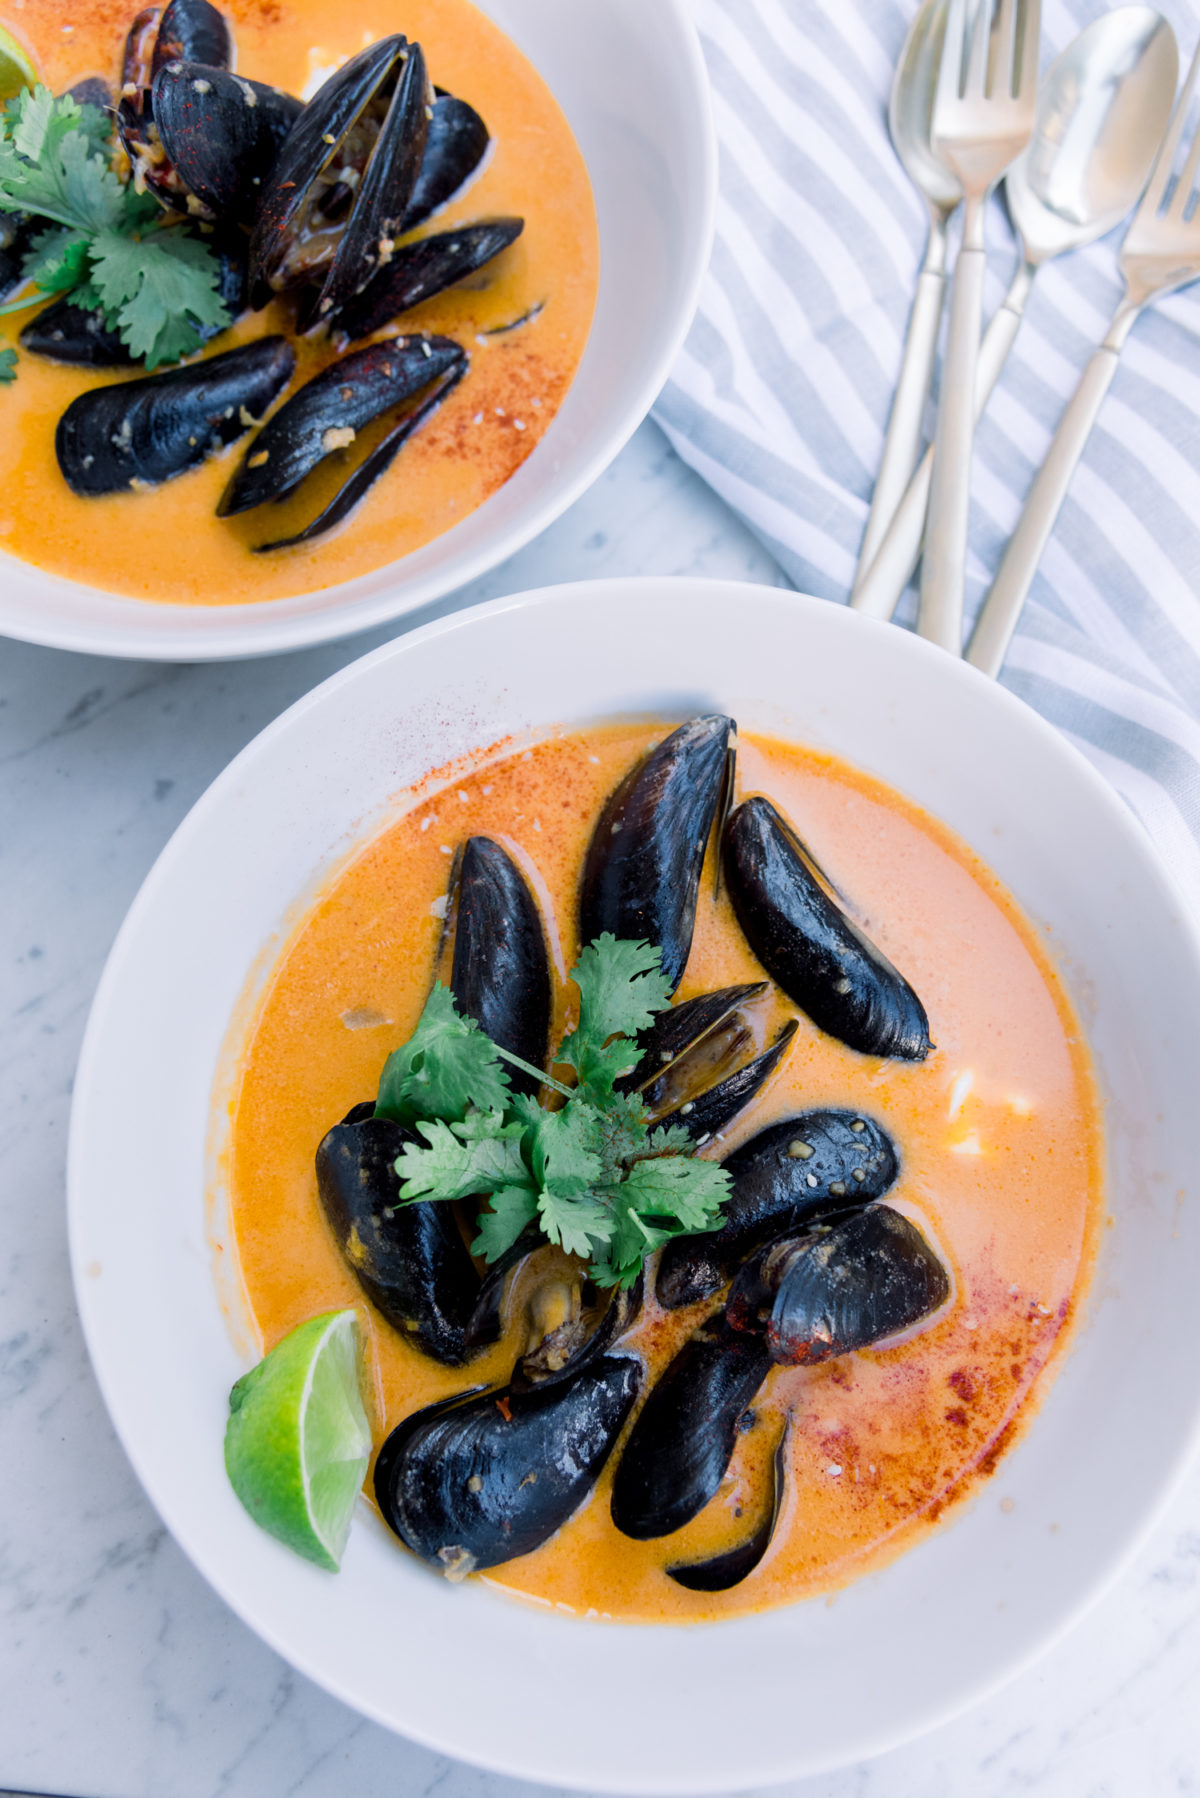 Thai Mussels in a Spicy Coconut Sauce